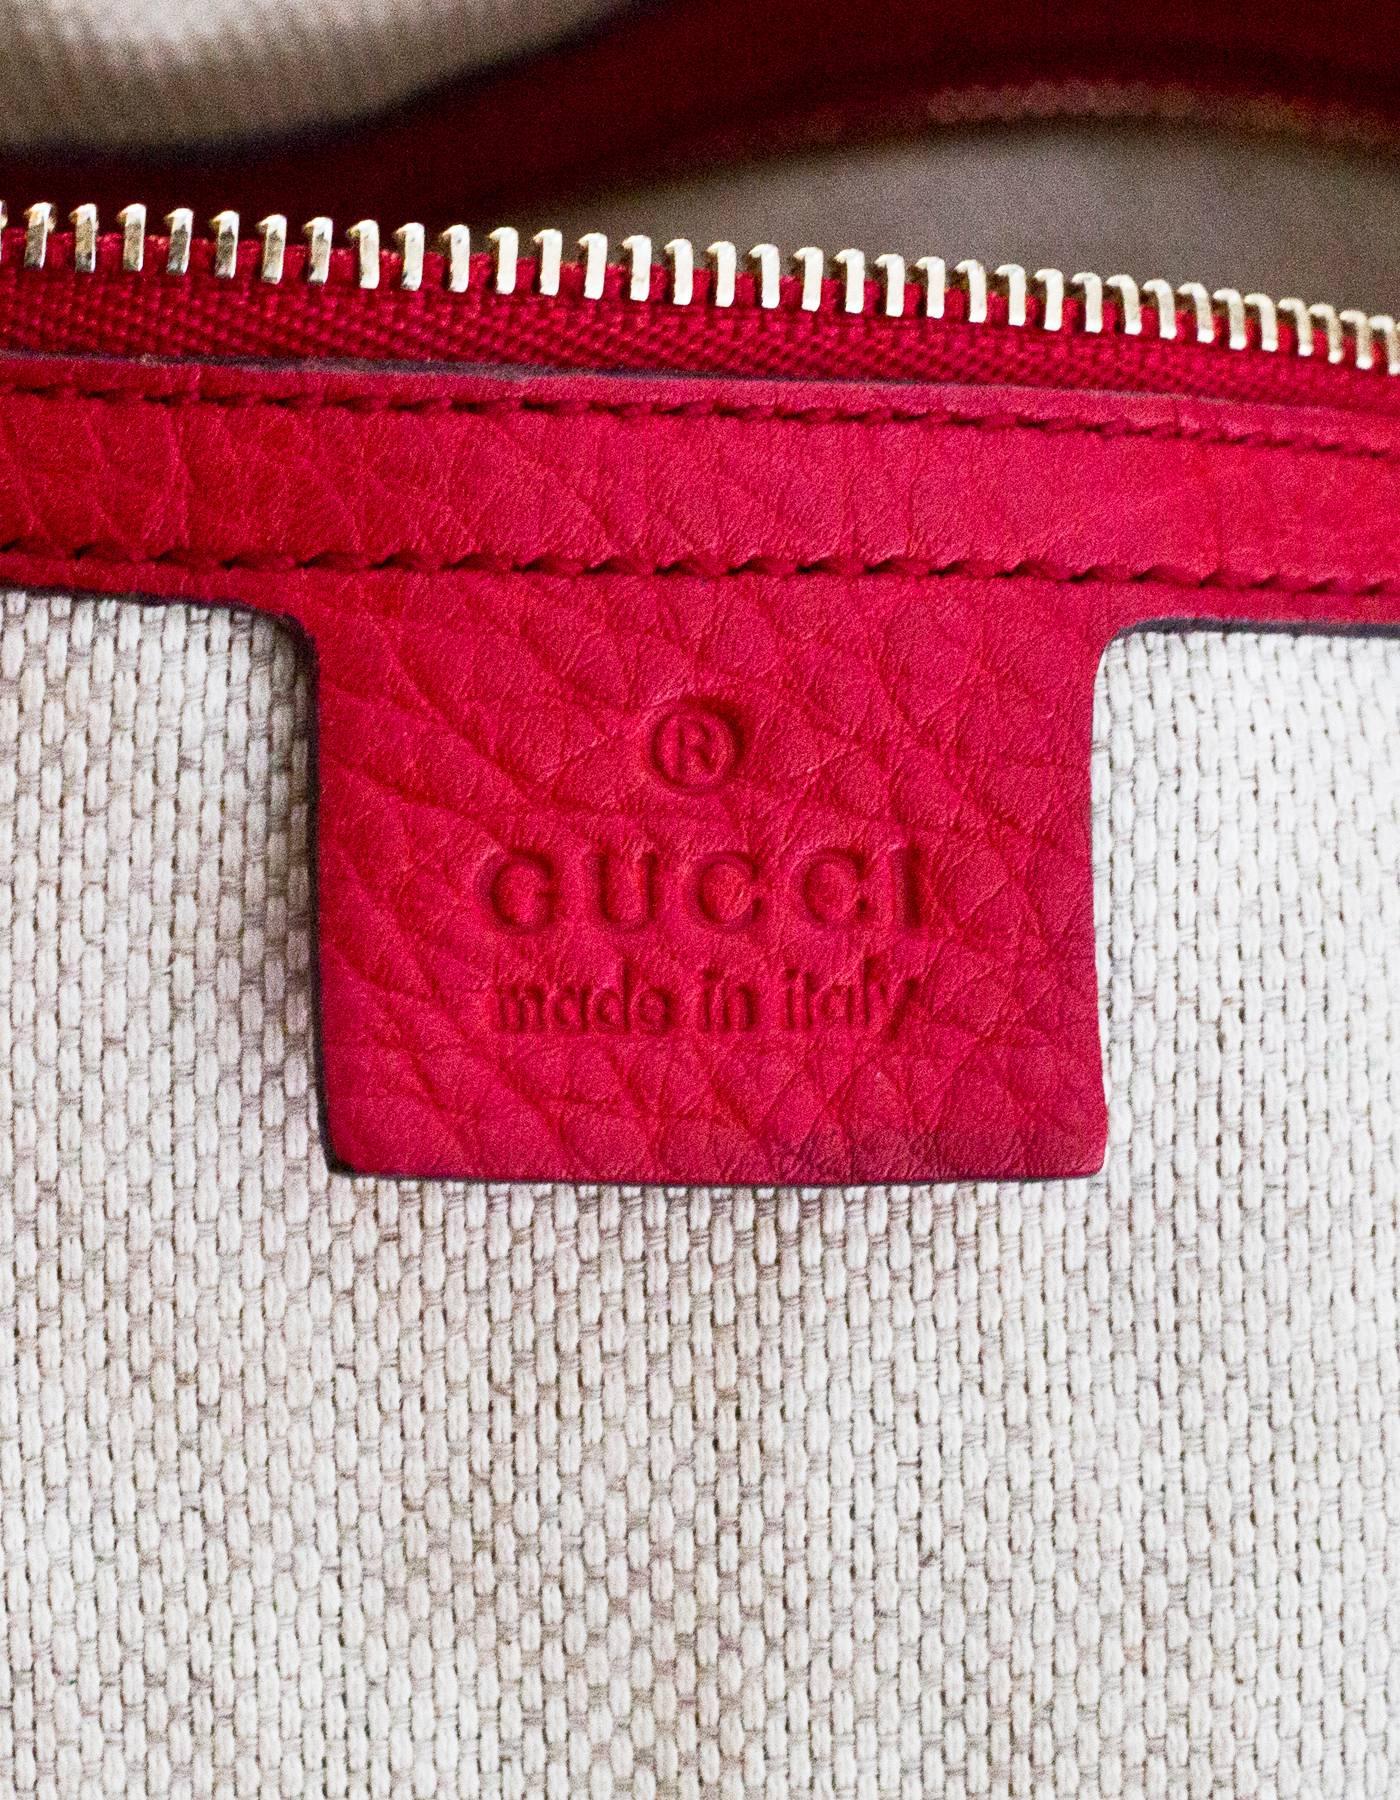 Gucci Red Leather Large Soho Tote Bag 1